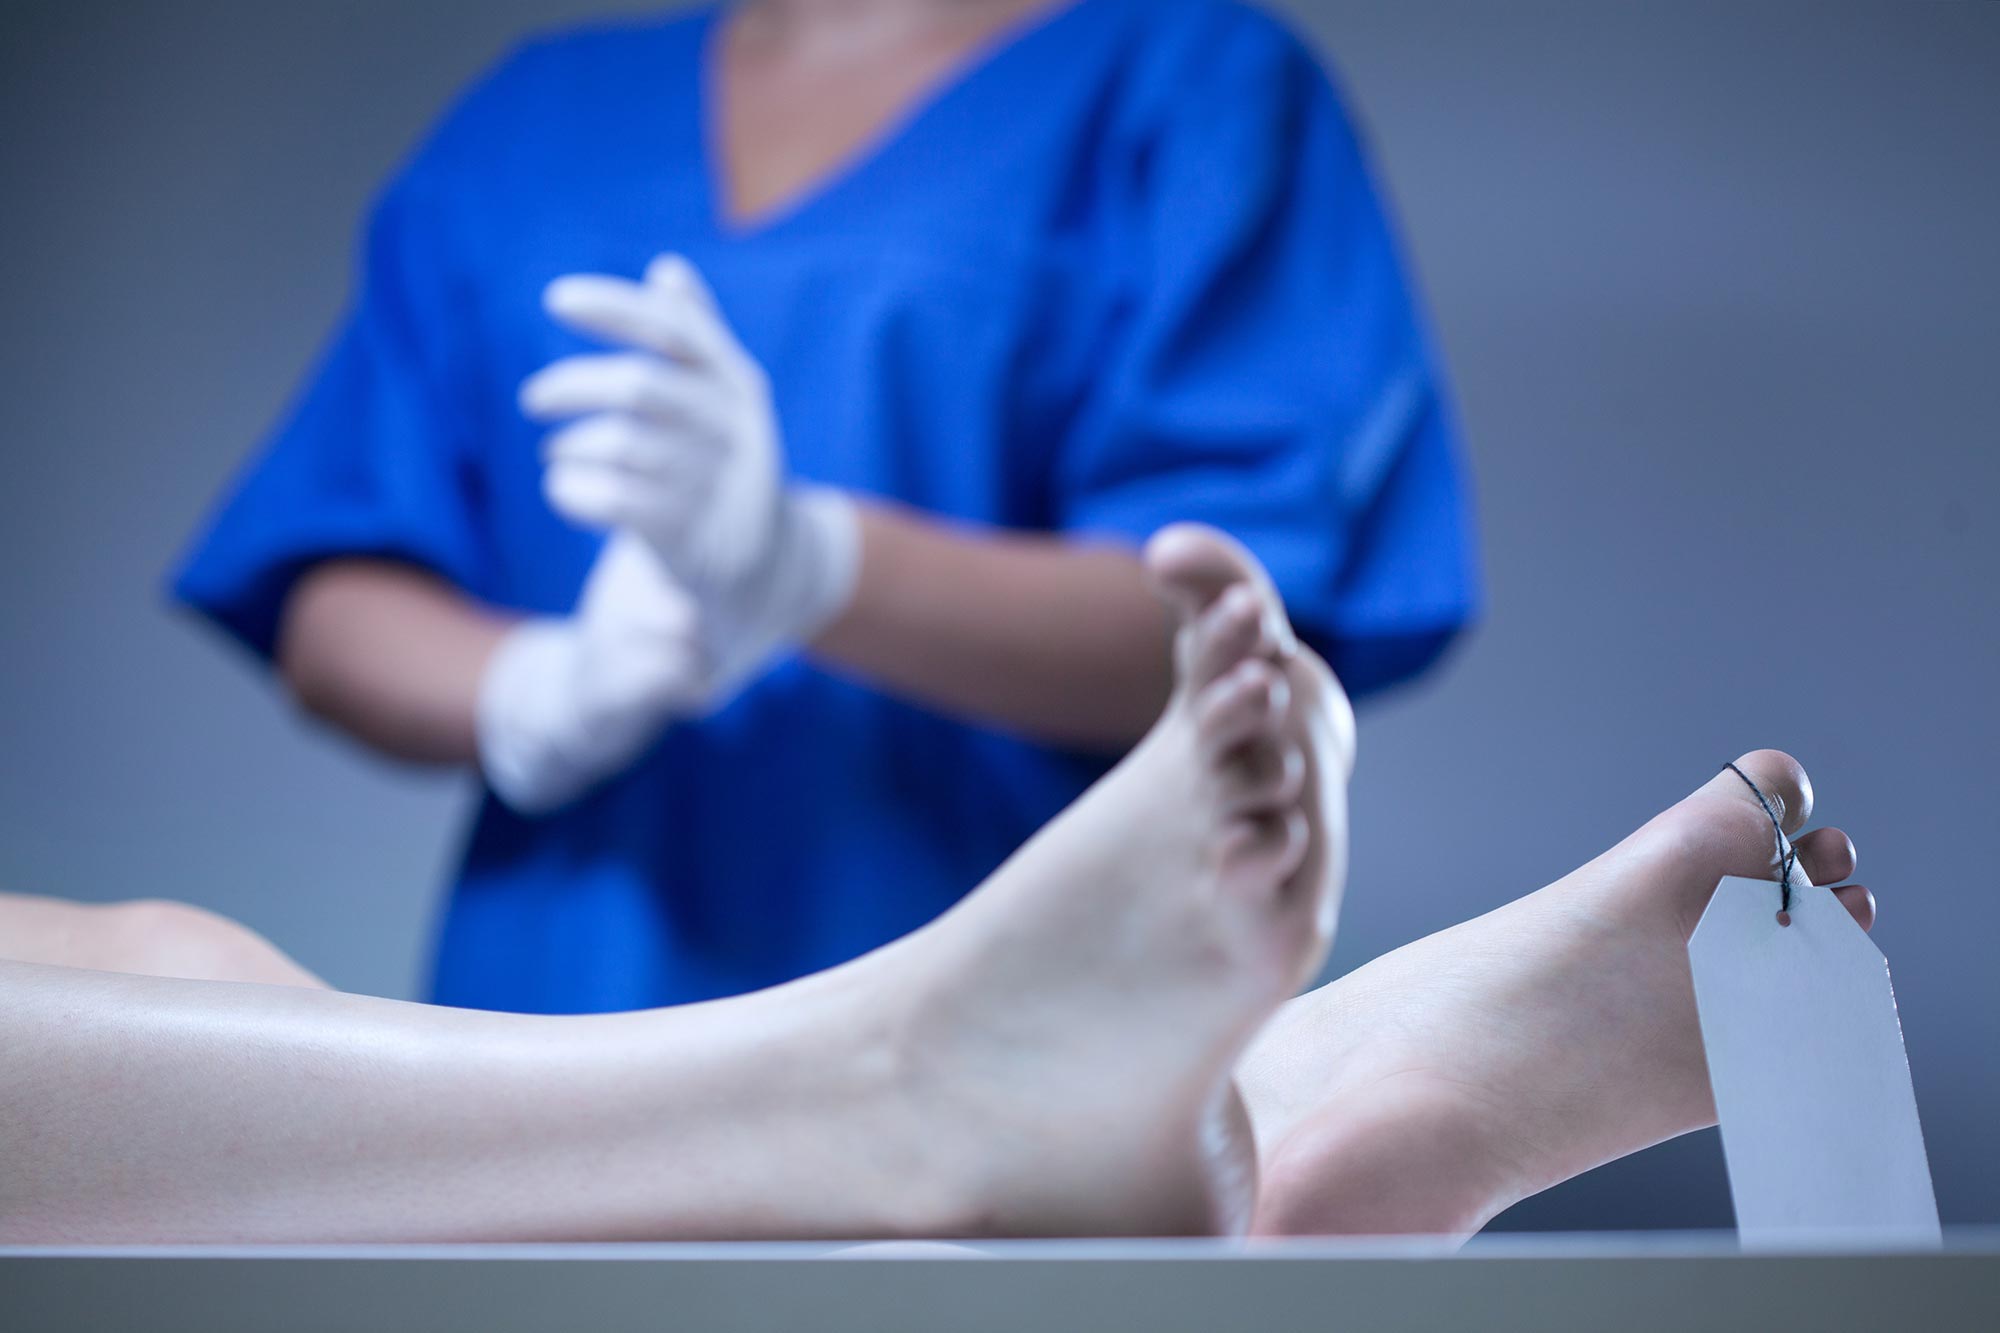 Autopsies reveal startling new information